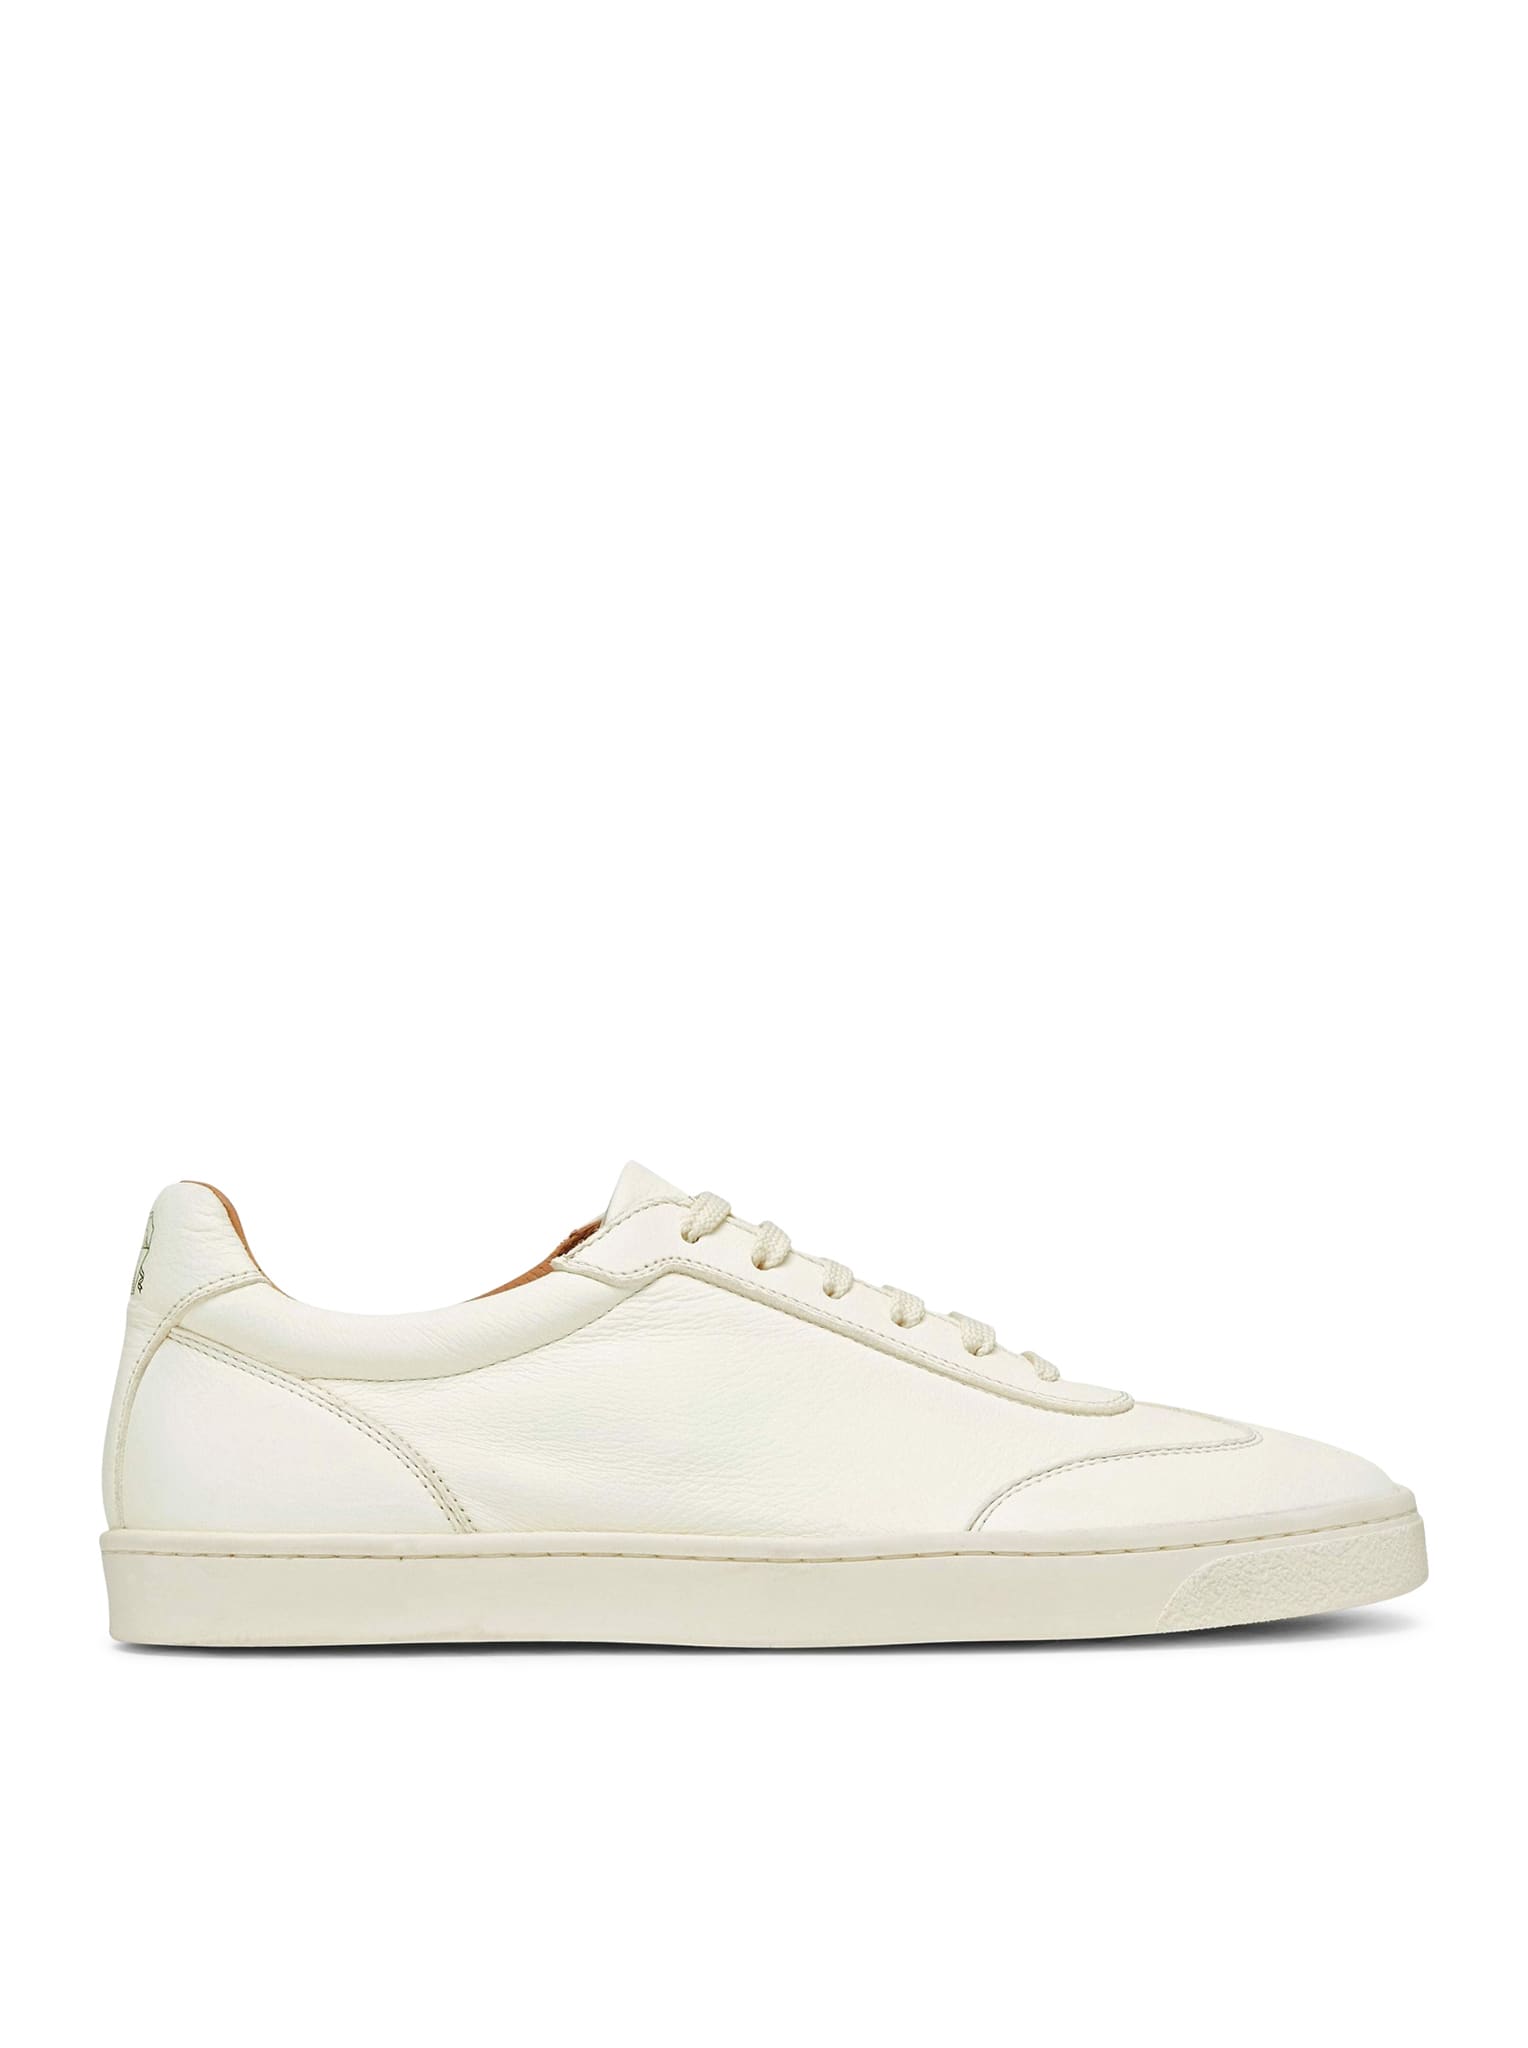 Shop Brunello Cucinelli Pair Of Sneakers In Panama